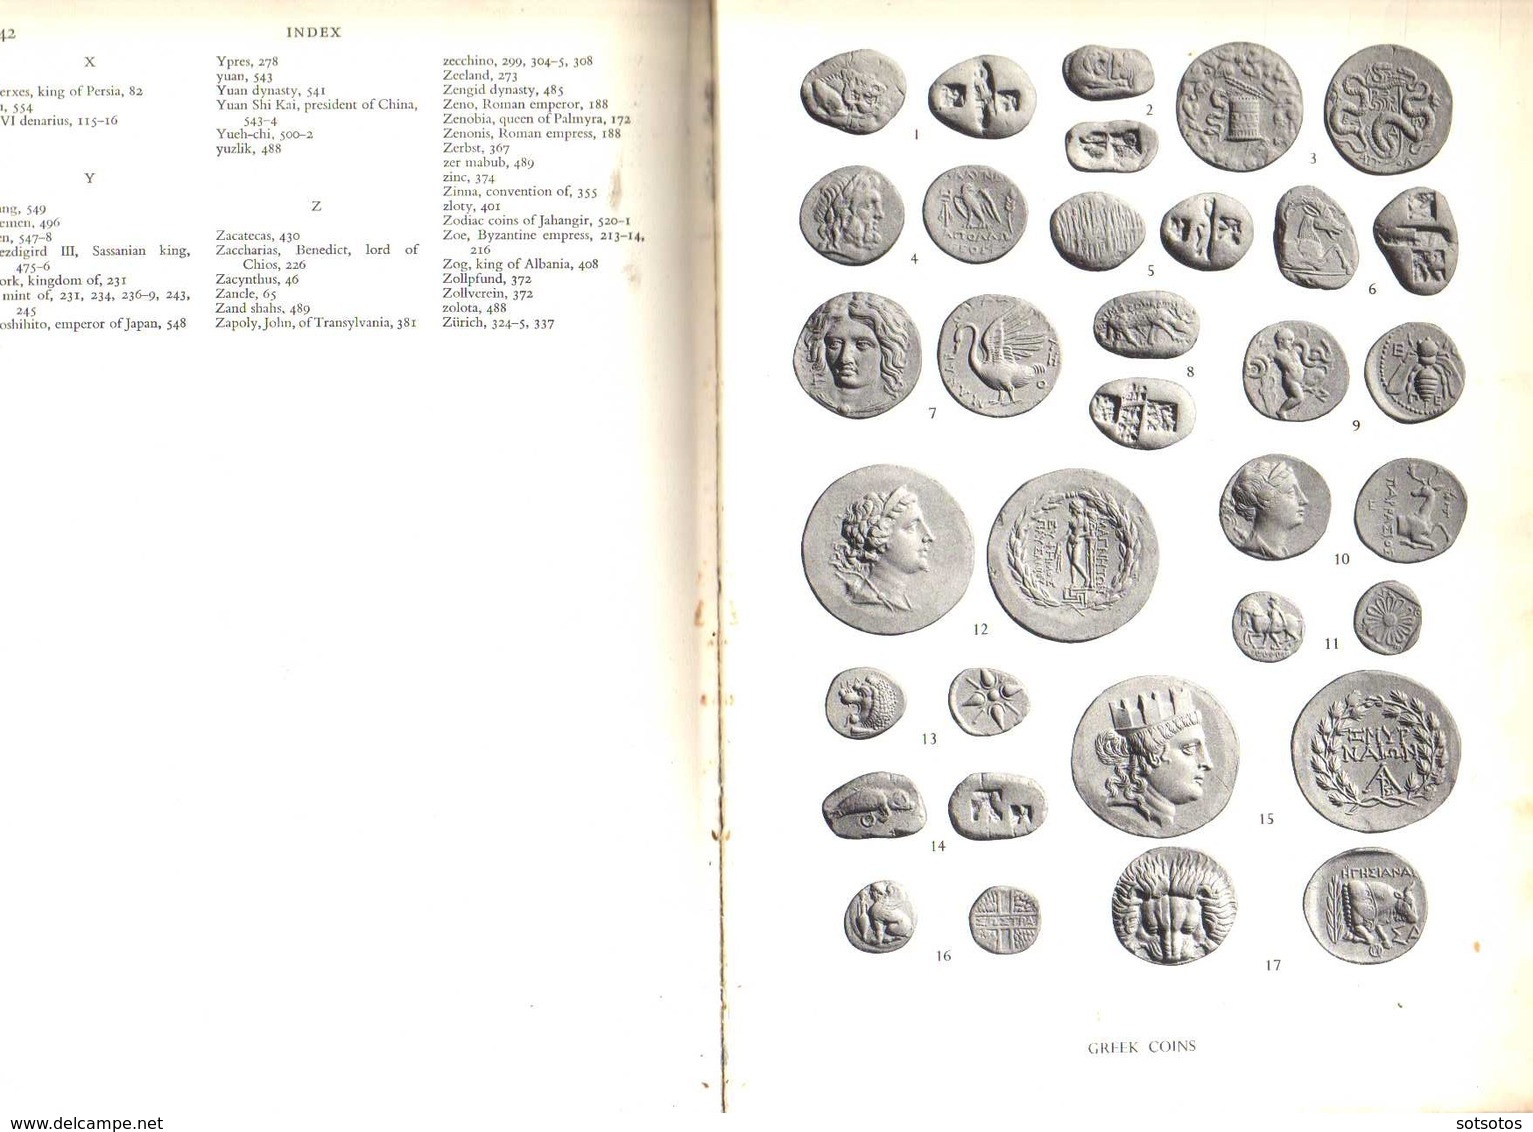 Coins, Ancient, Medieval and Modern by R.A.G. Carson, ed. Hutchinson of London, 1962 - 642 pages + 64 pages of plates wi